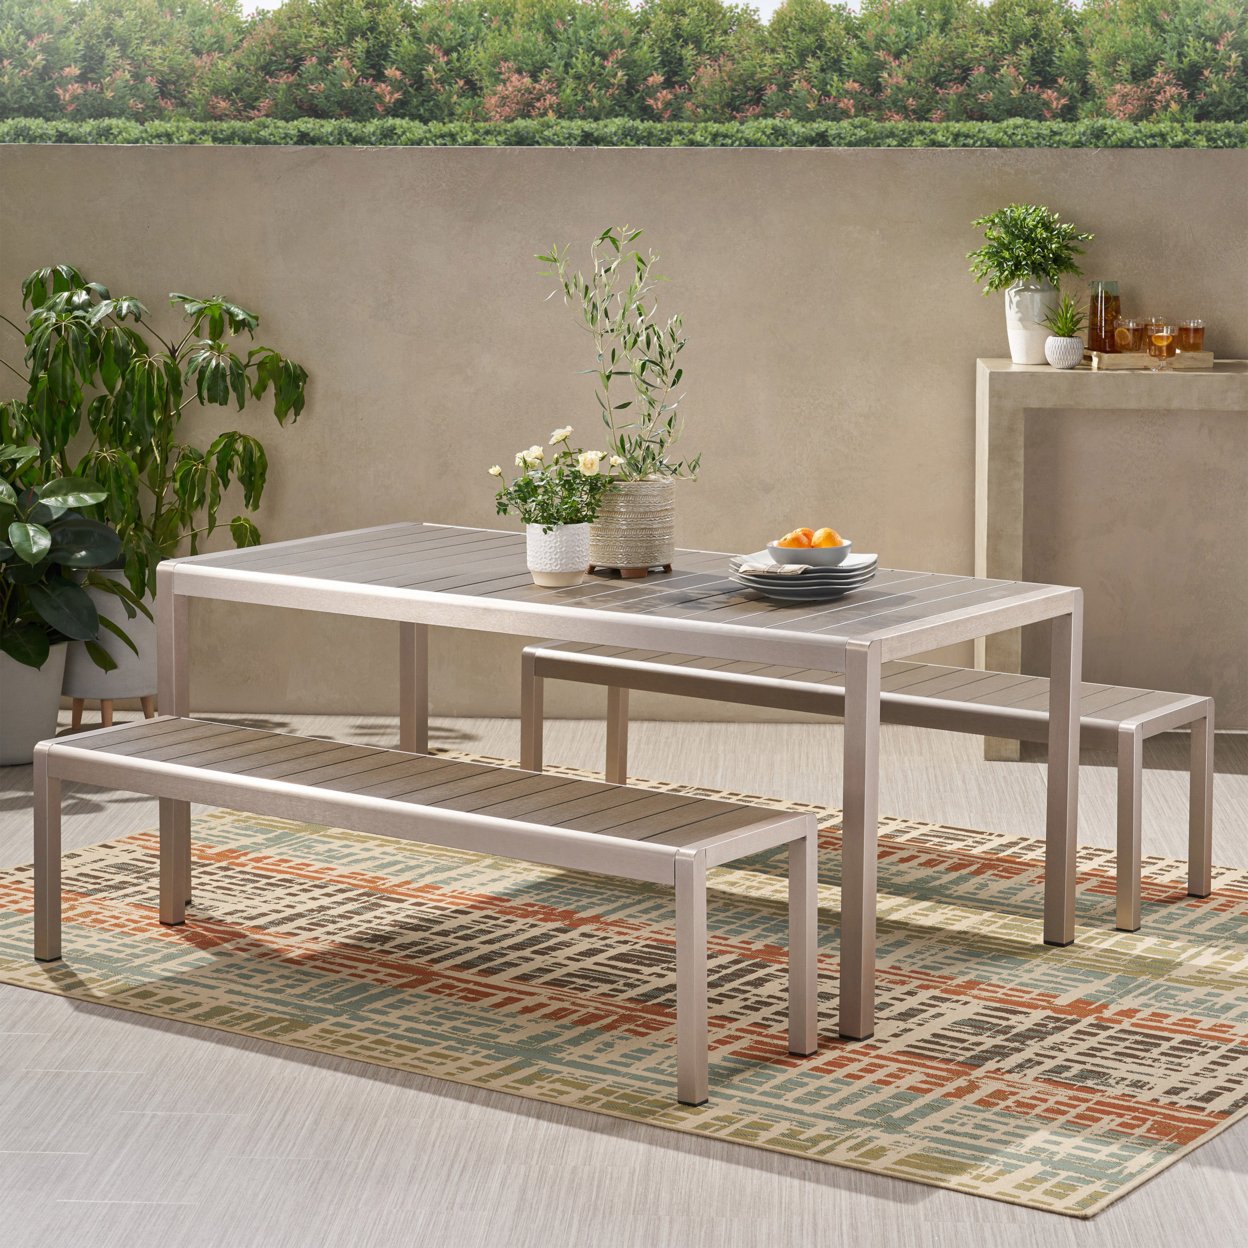 Odelette Outdoor Modern Aluminum Picnic Dining Set With Dining Benches - Gray + Silver